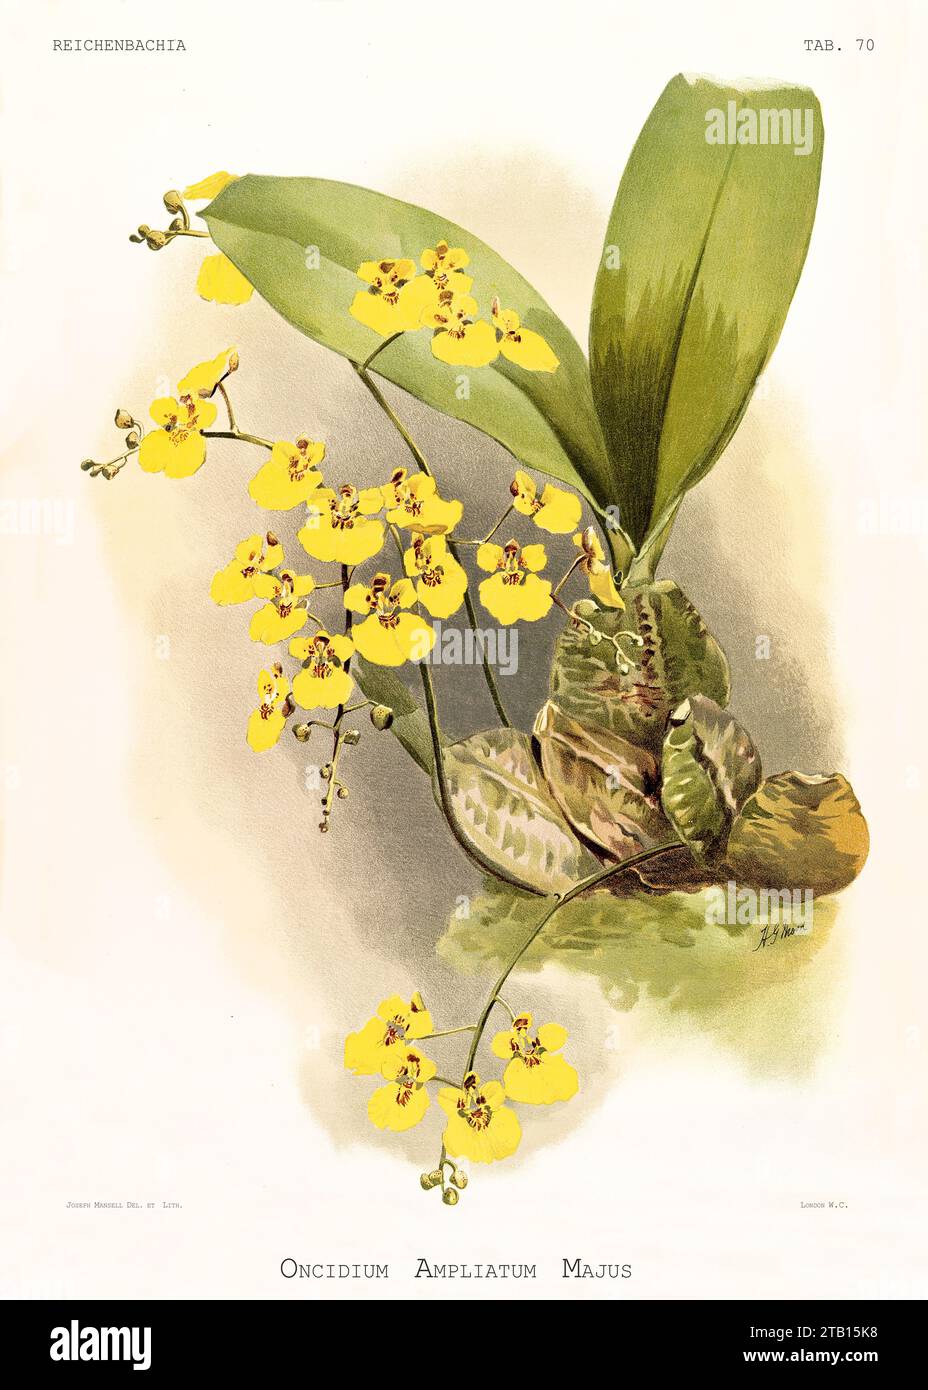 Old illustration of  Turtle Shell Orchid (Rossioglossum ampliatum). Reichenbachia, by F. Sander. St. Albans, UK, 1888 - 1894 Stock Photo